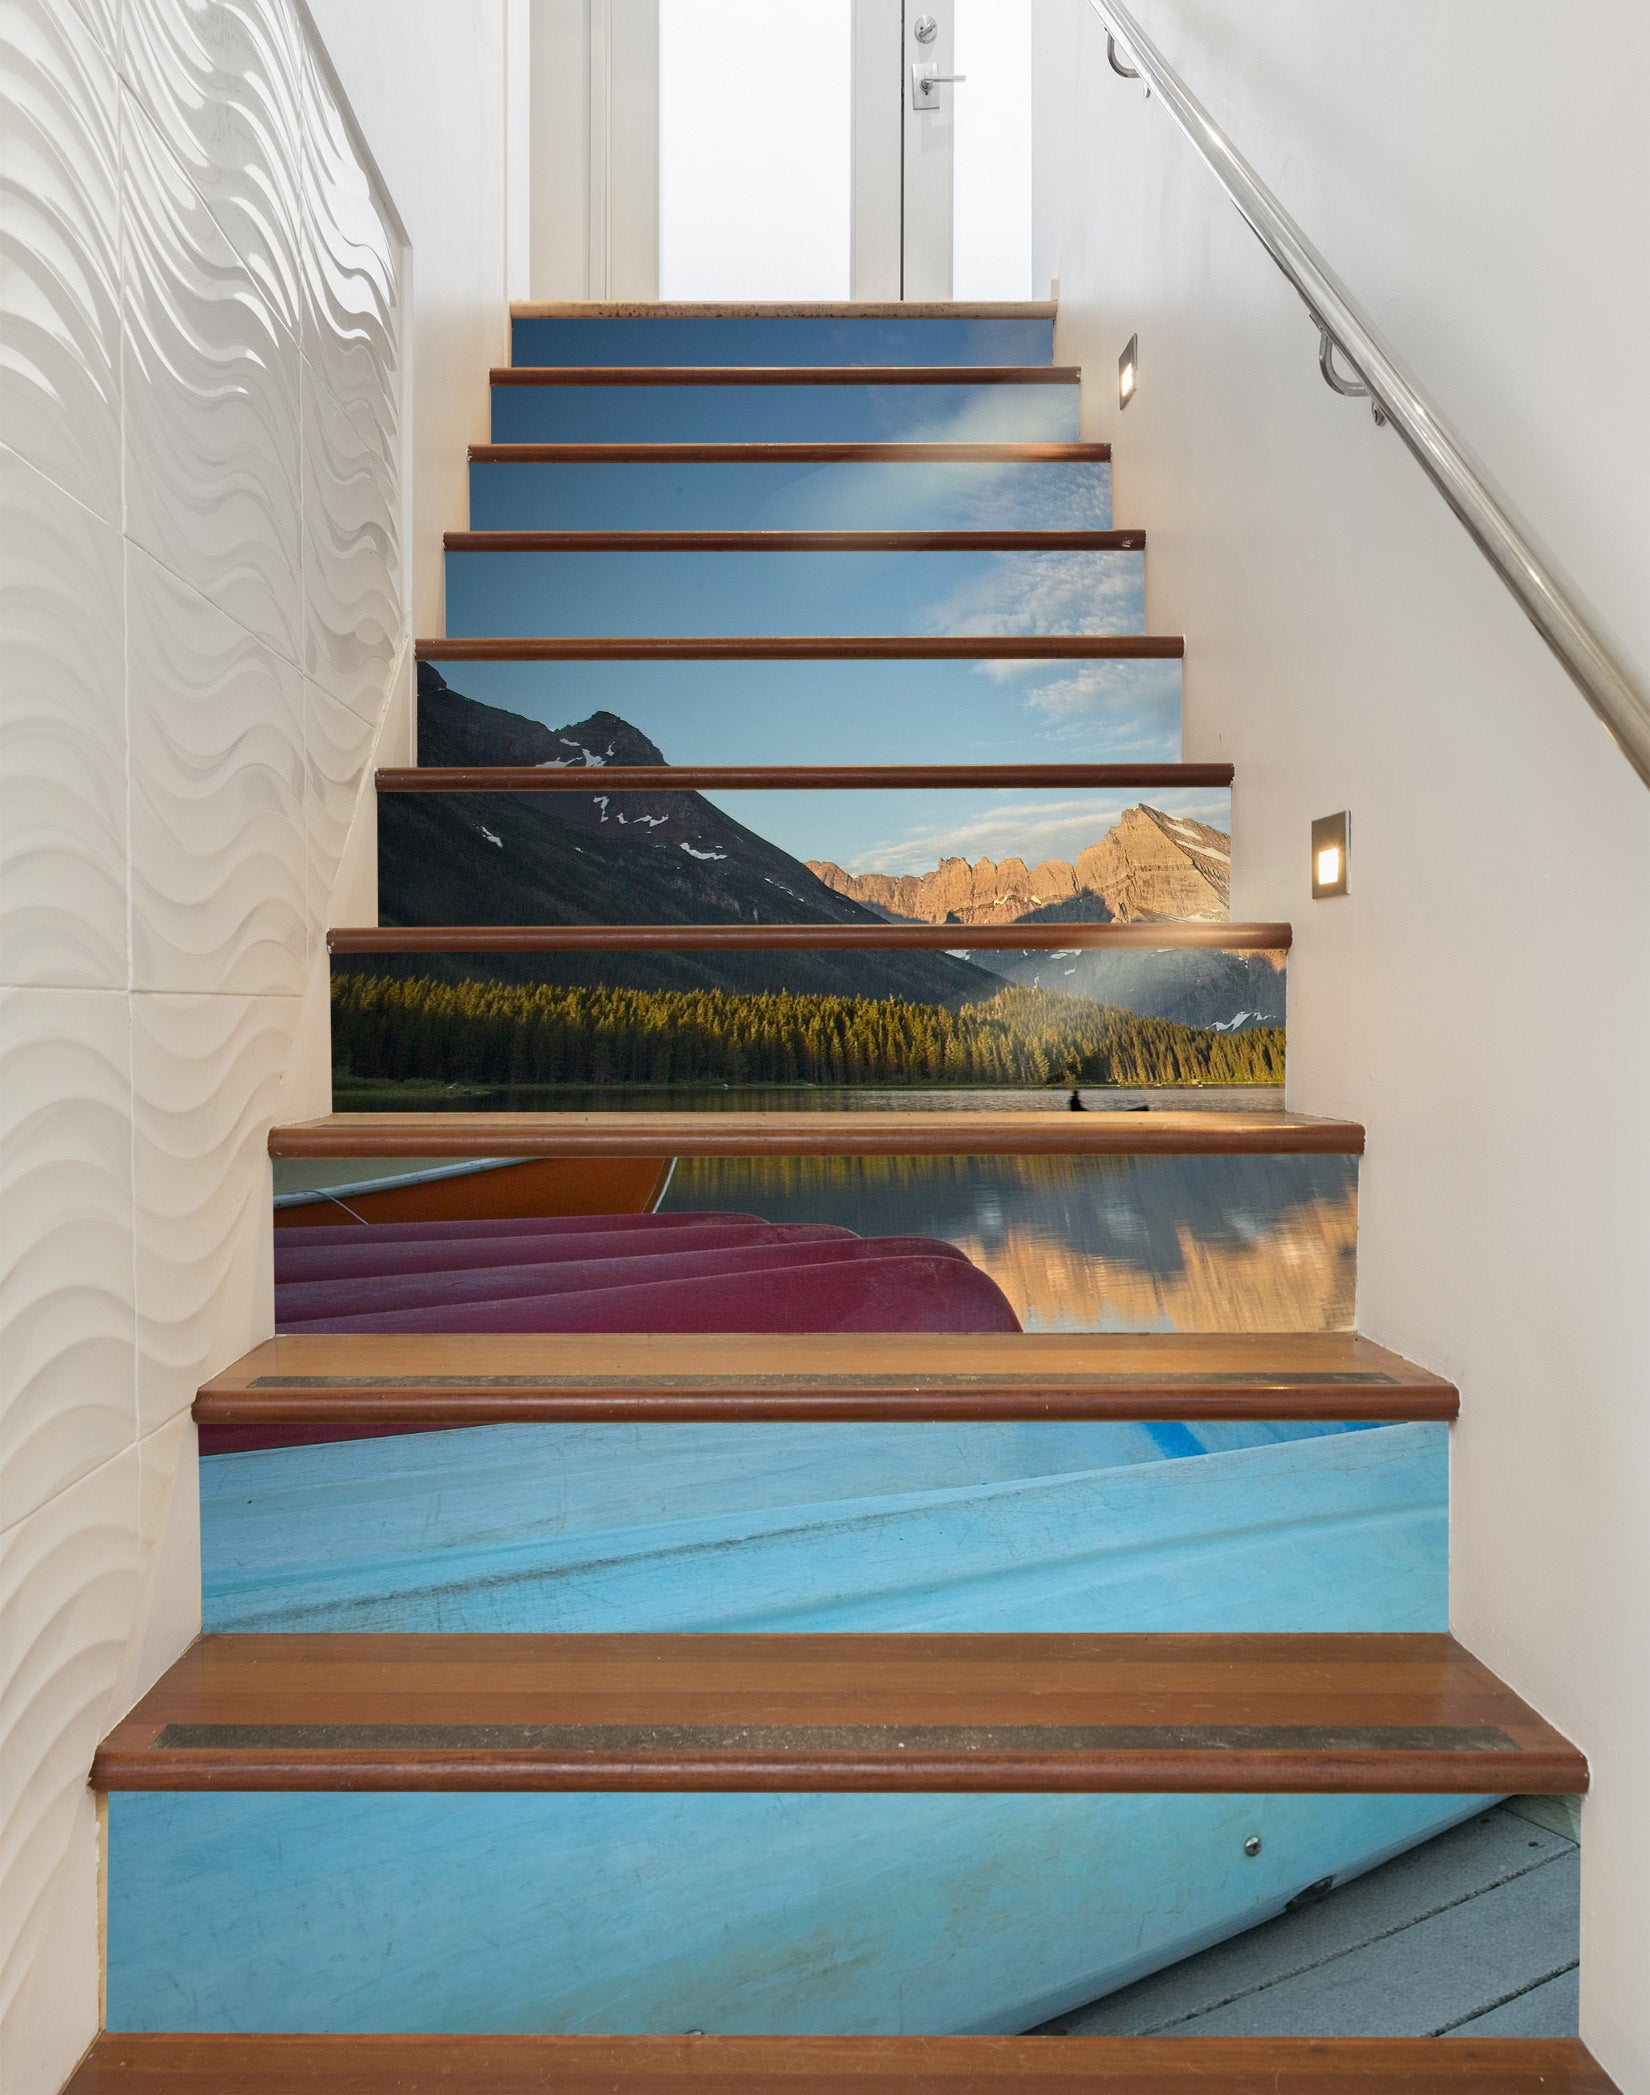 3D Mountain River Boat 9909 Kathy Barefield Stair Risers